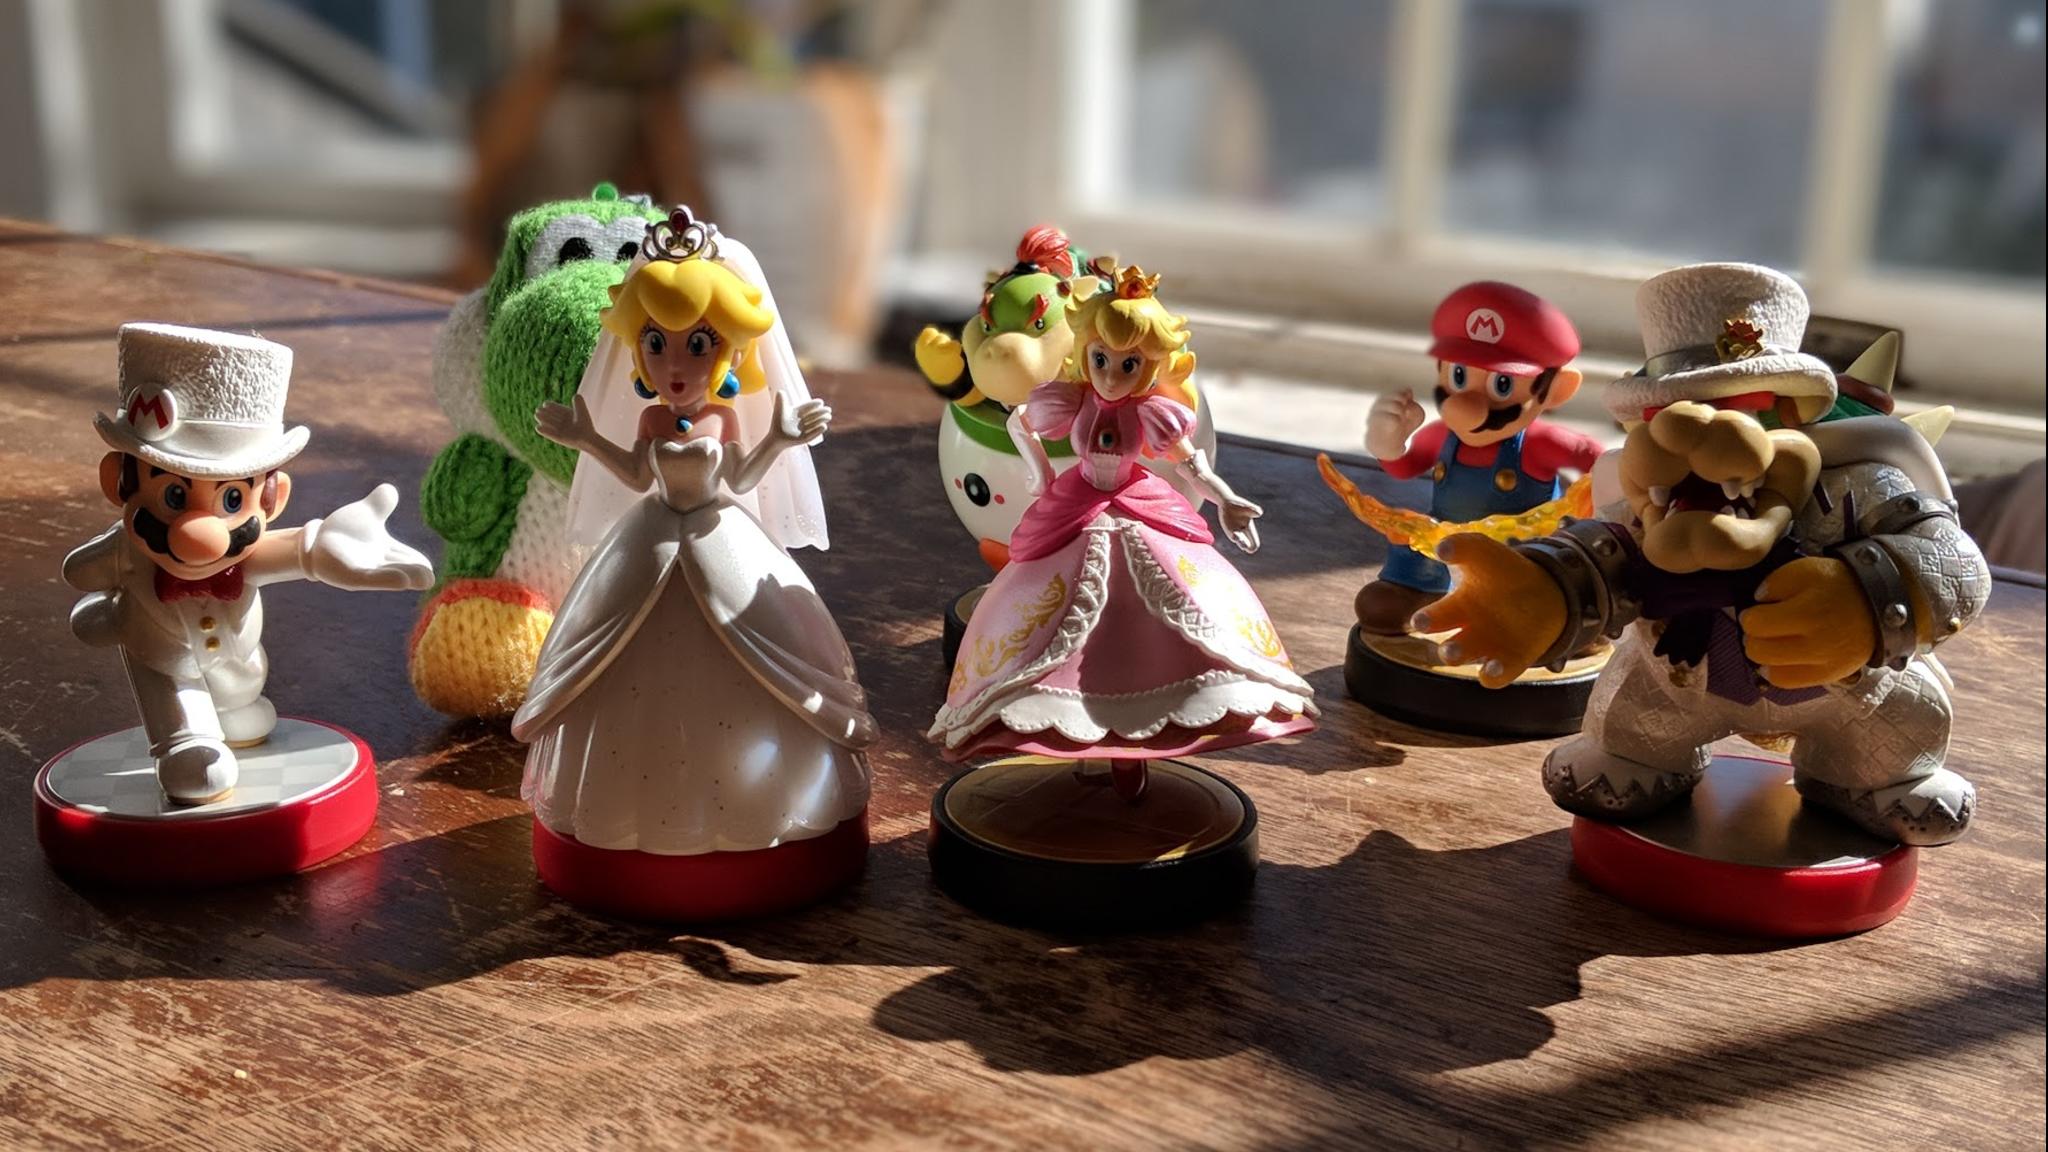 The Super Mario Odyssey Amiibo Packaging Have Leaked Three New